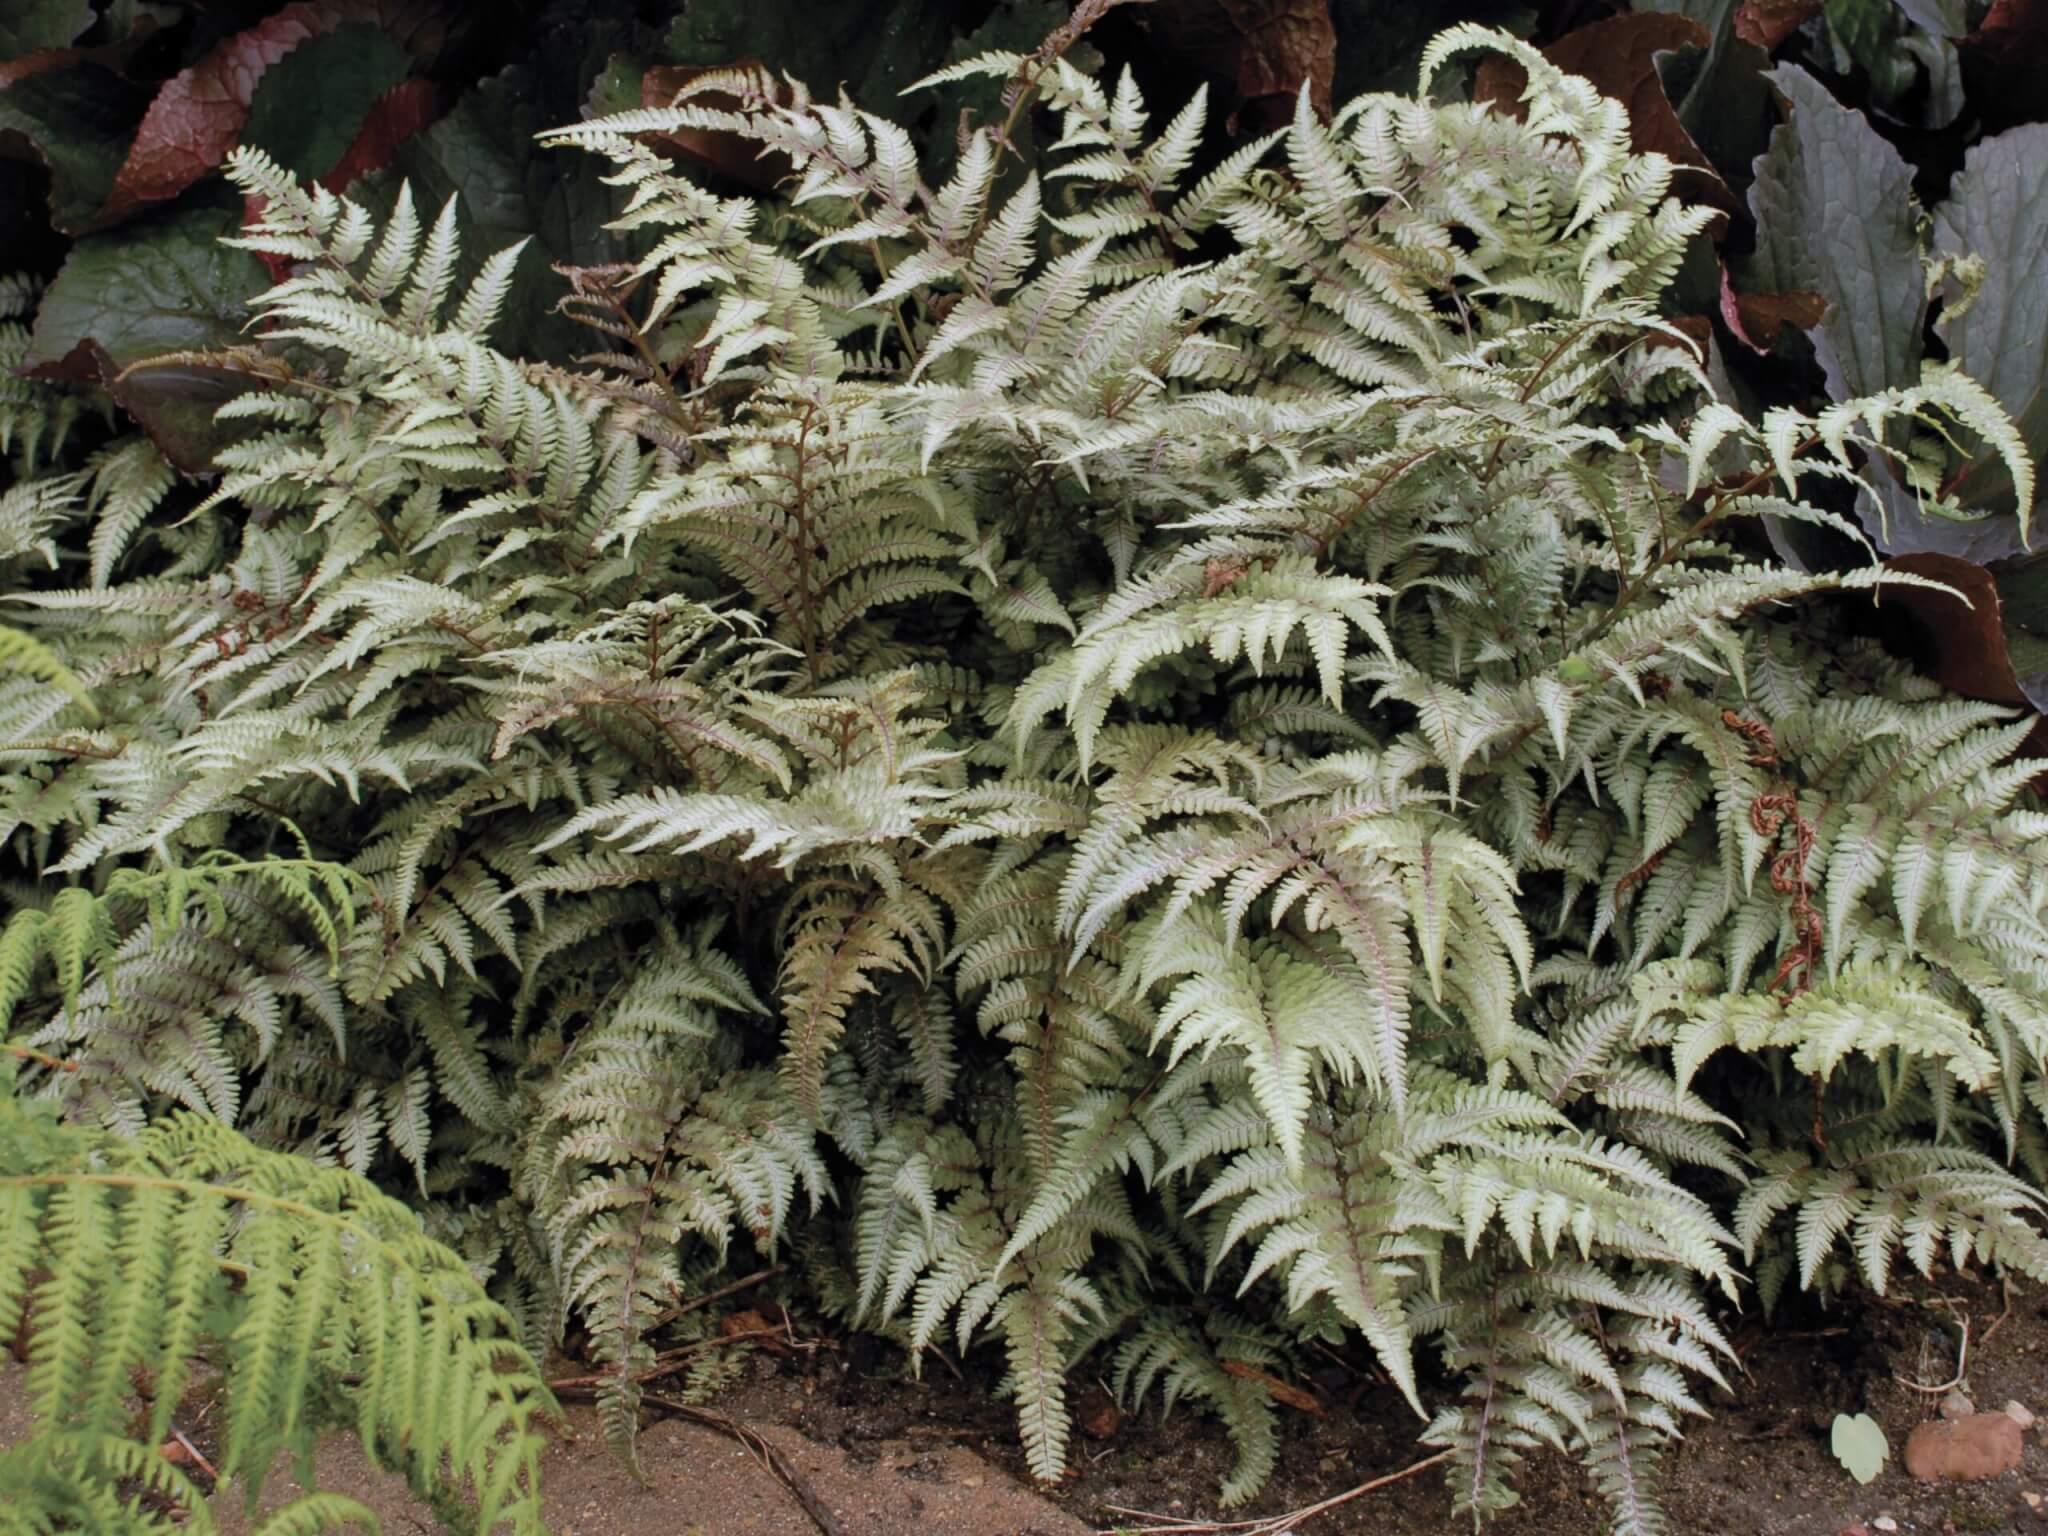 Fern, Japanese Painted